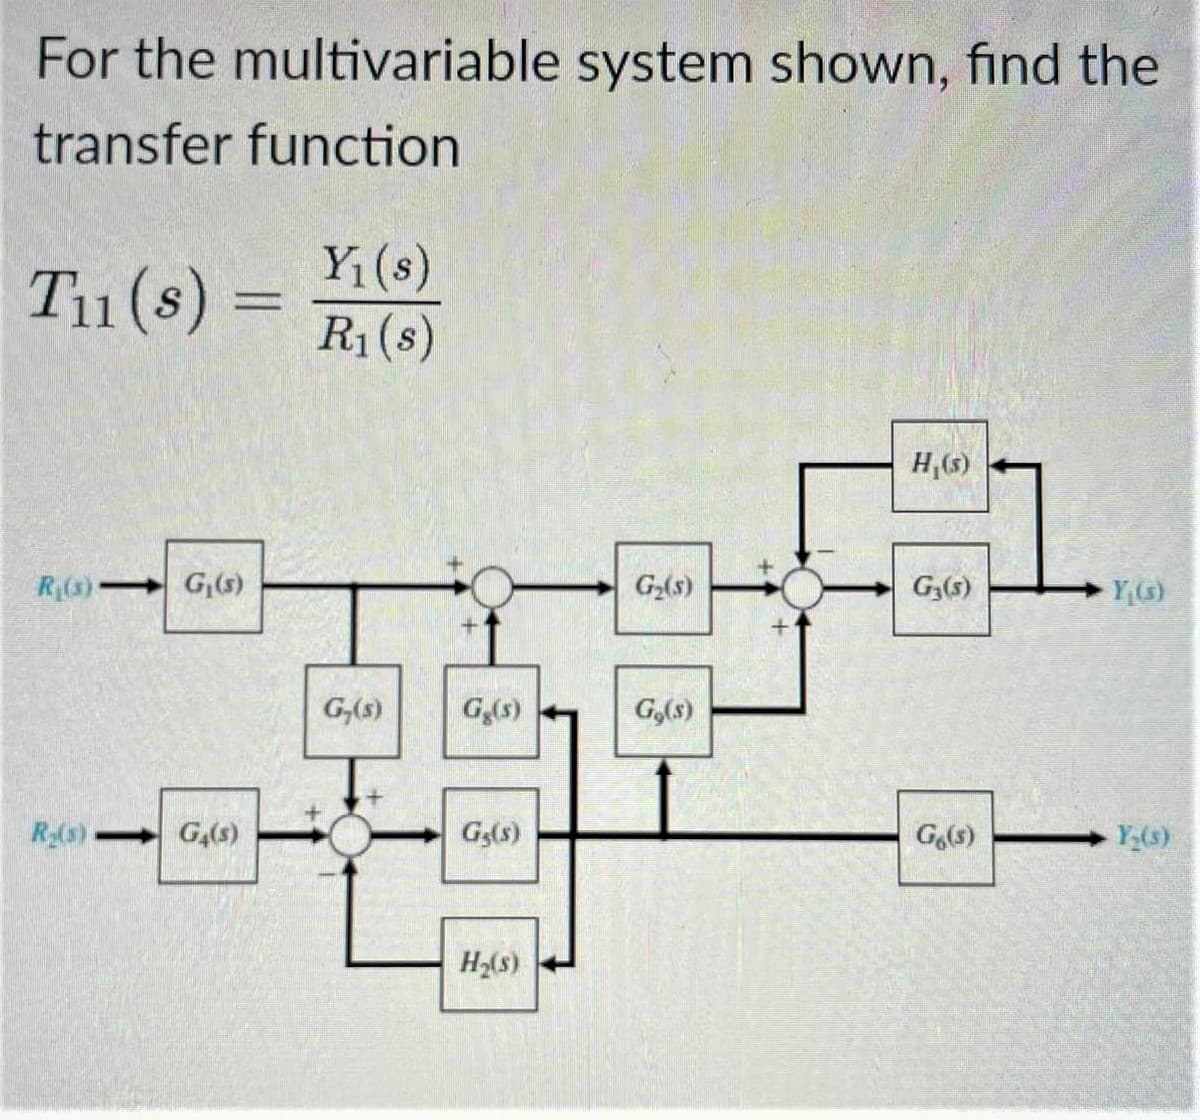 For the multivariable system shown, find the
transfer function
T₁1 (s) =
R₁(s) G₁(s)
R₂(s)-> G4(s)
Y₁(s)
R₁ (s)
G,(s)
Gg(s)
G5(S)
H₂(s)
G₂(s)
G,(s)
+
H,(s)
G₂(s)
Go(s)
1
Y₁(s)
Y,(s)